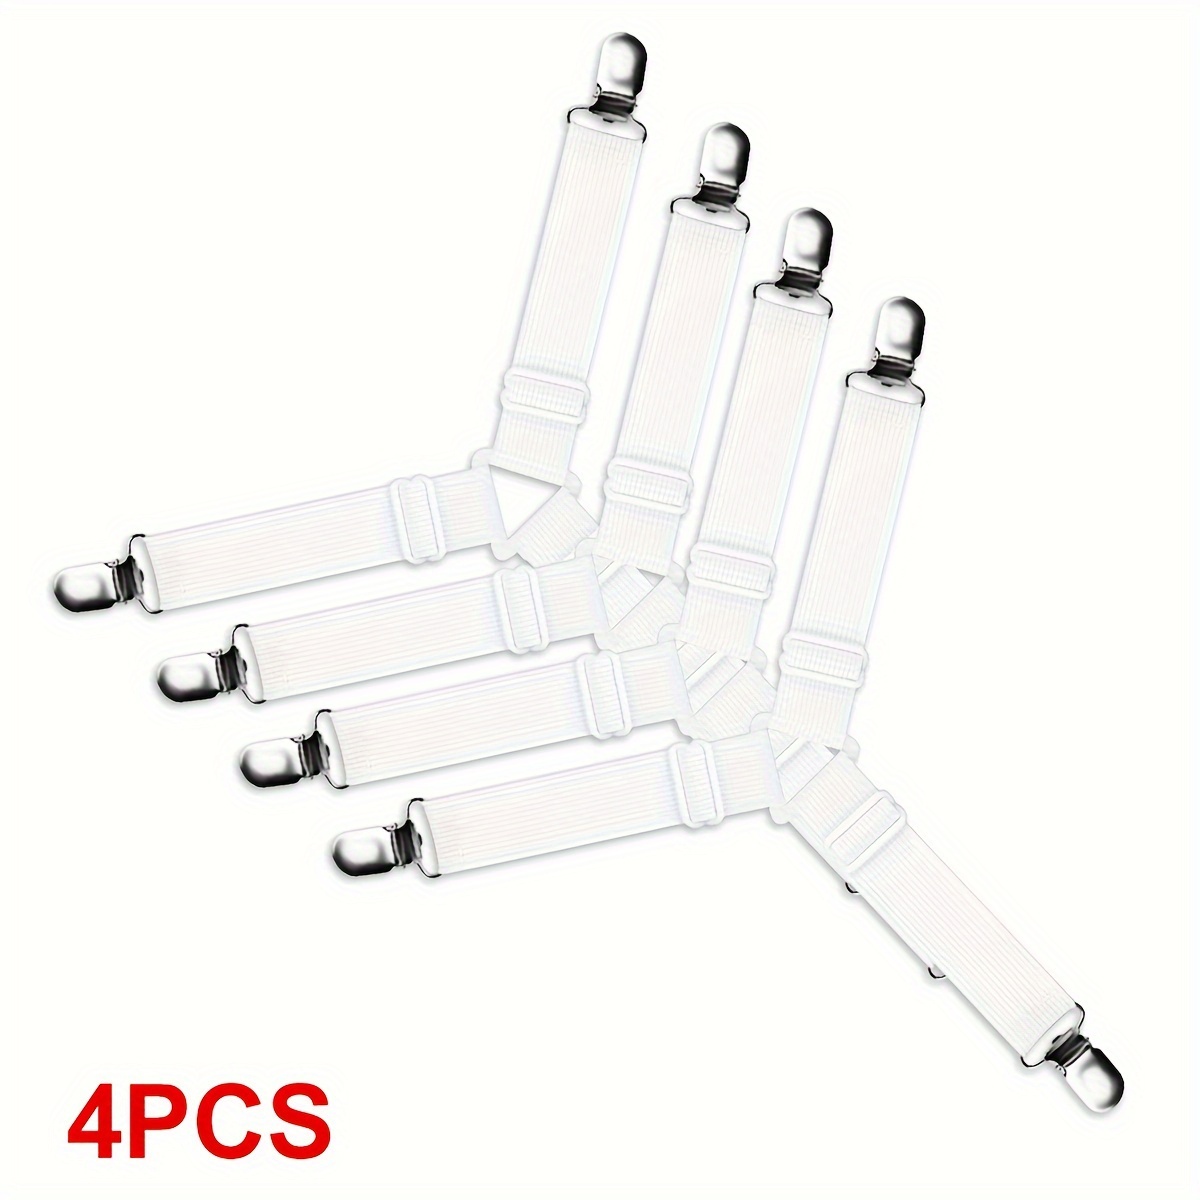 4pcs Bed Sheet Fasteners, Adjustable Triangle Elastic Straps Clips